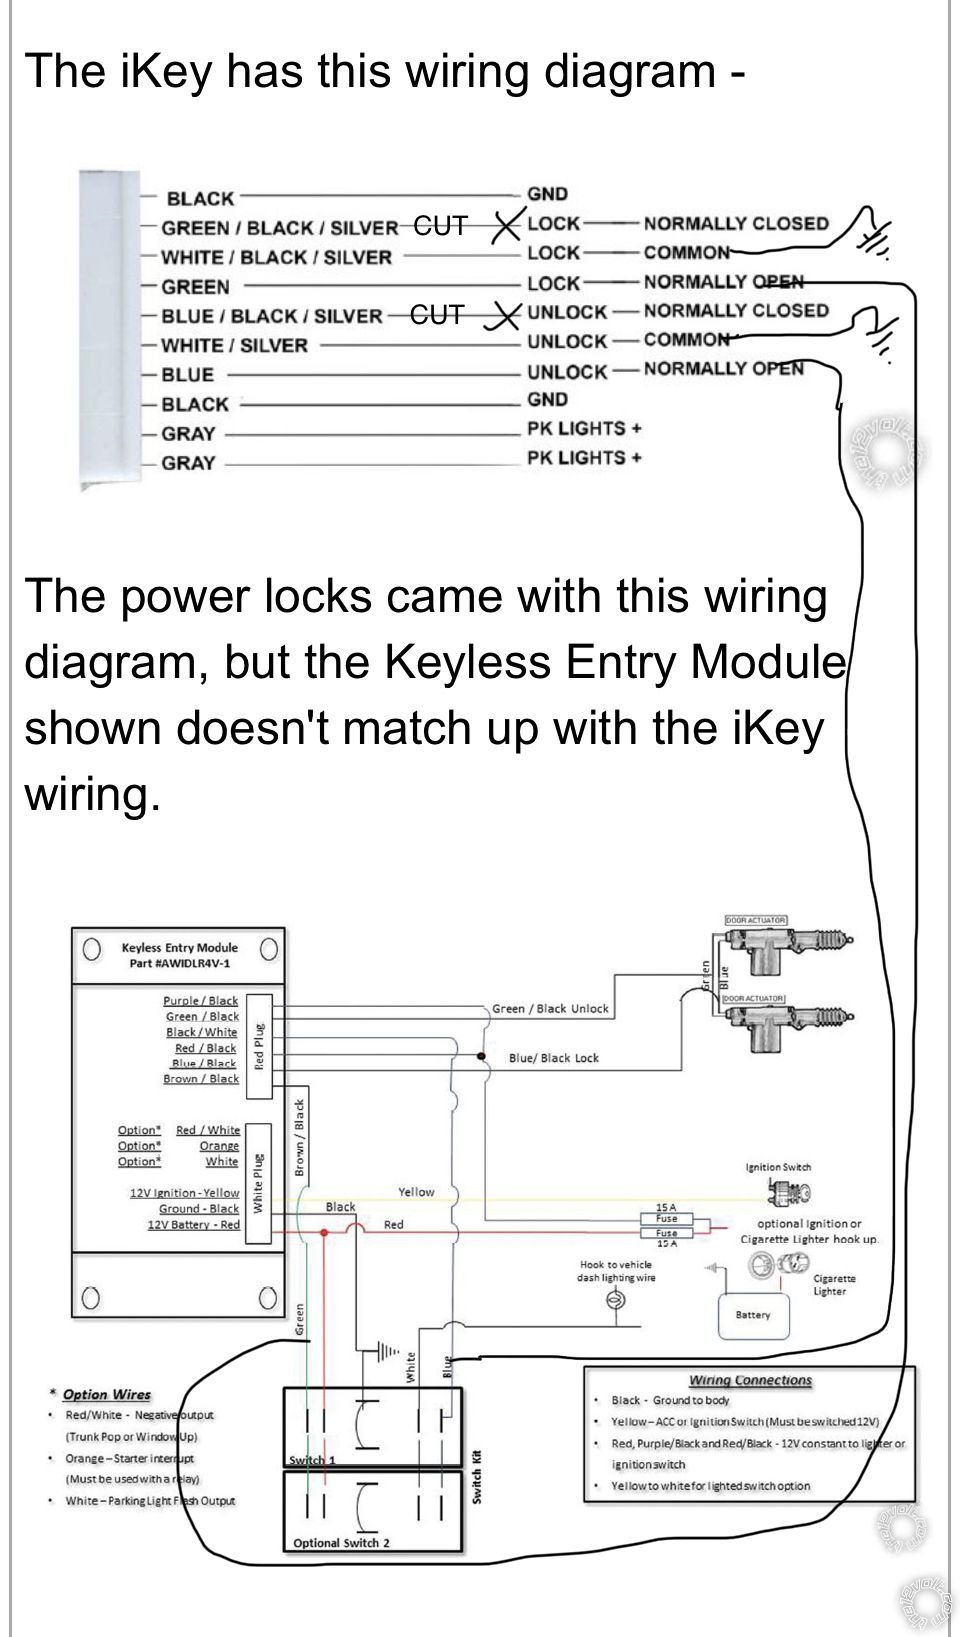 Keyless Entry Wiring, 1965 Ford Mustang Resto-Mod - Last Post -- posted image.